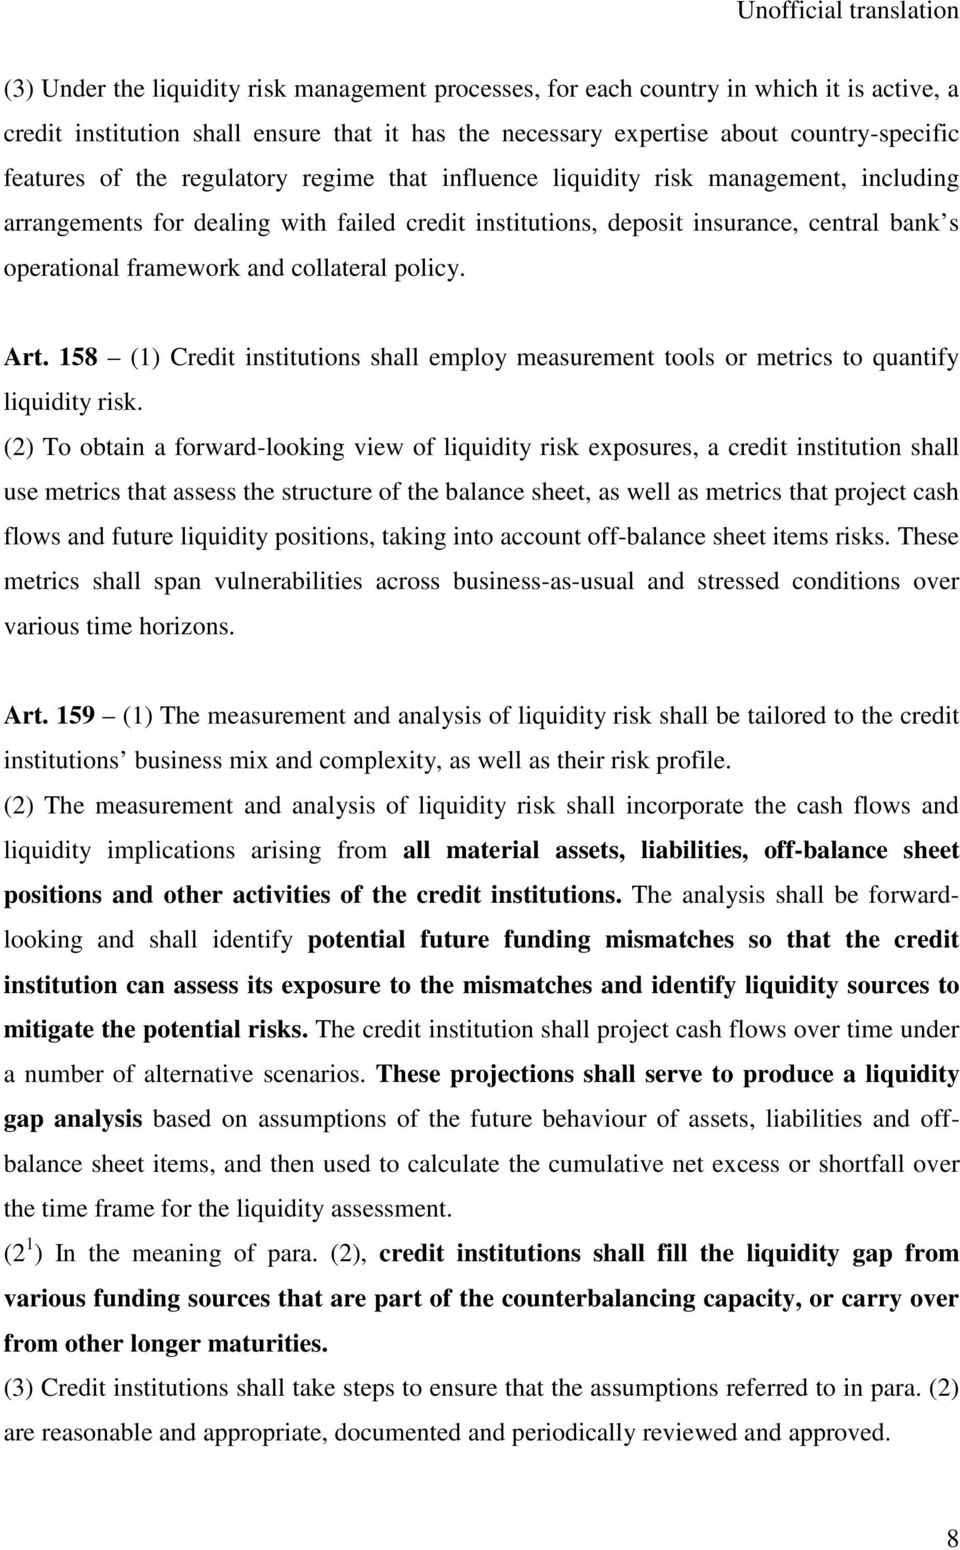 policy. Art. 158 (1) Credit institutions shall employ measurement tools or metrics to quantify liquidity risk.